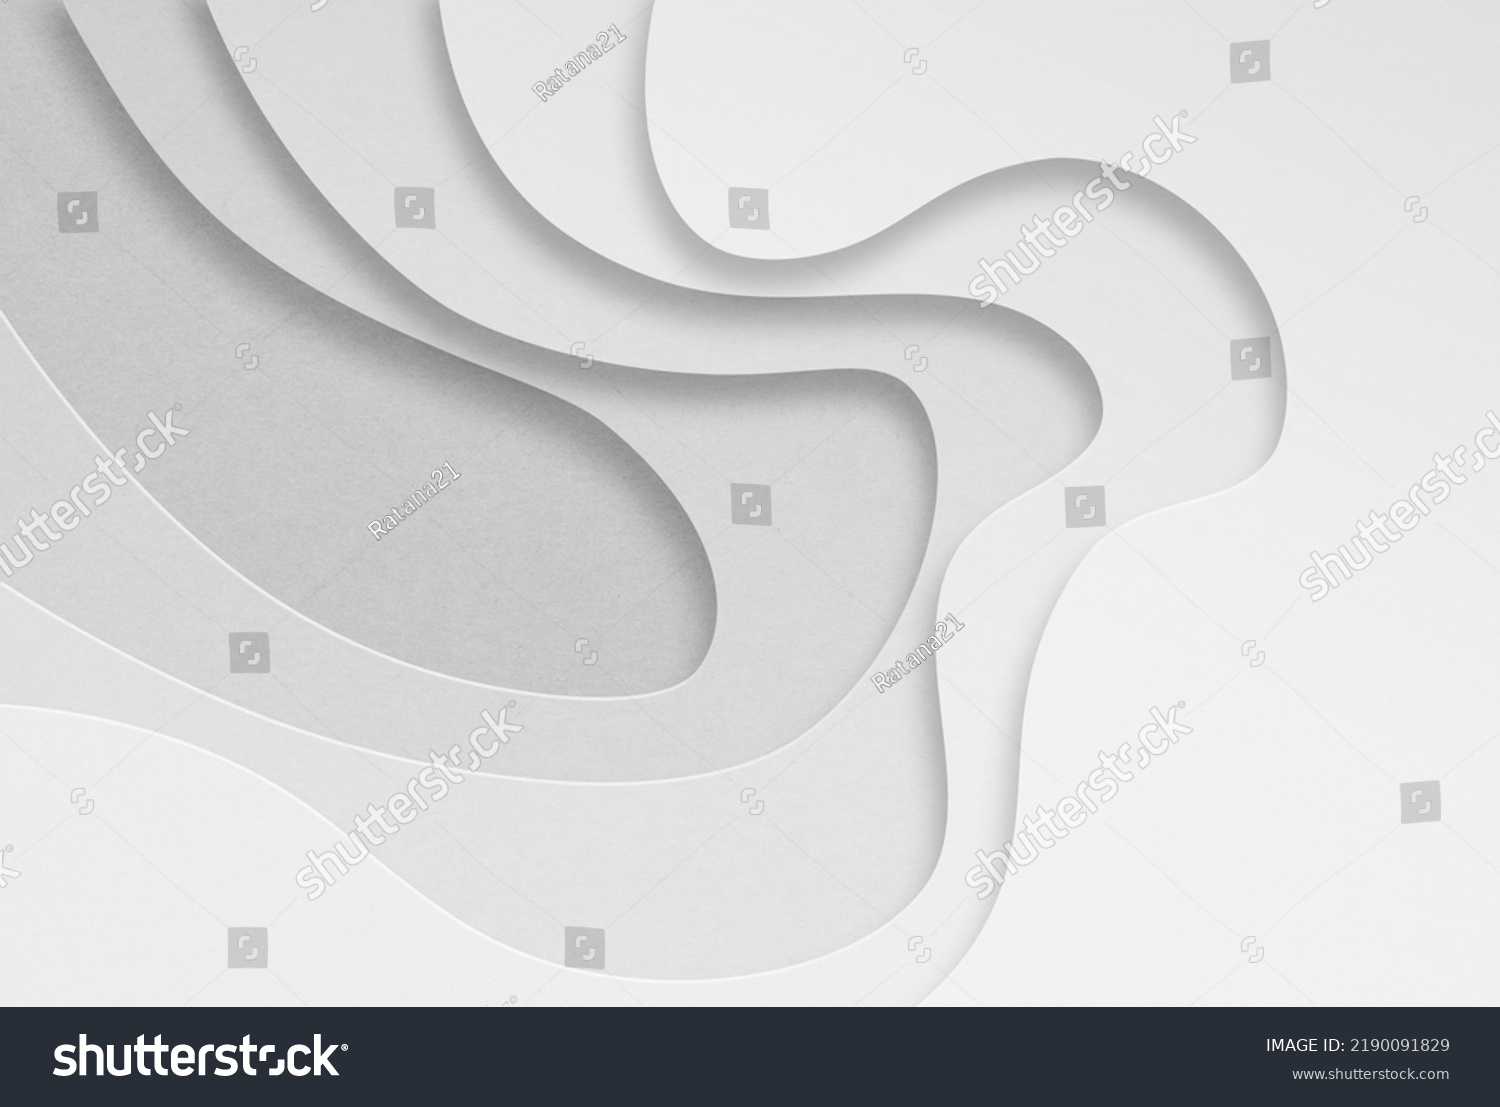 abstract grunge paper carve template background. For book cover or annual report template , business presentations, flyers, posters #2190091829